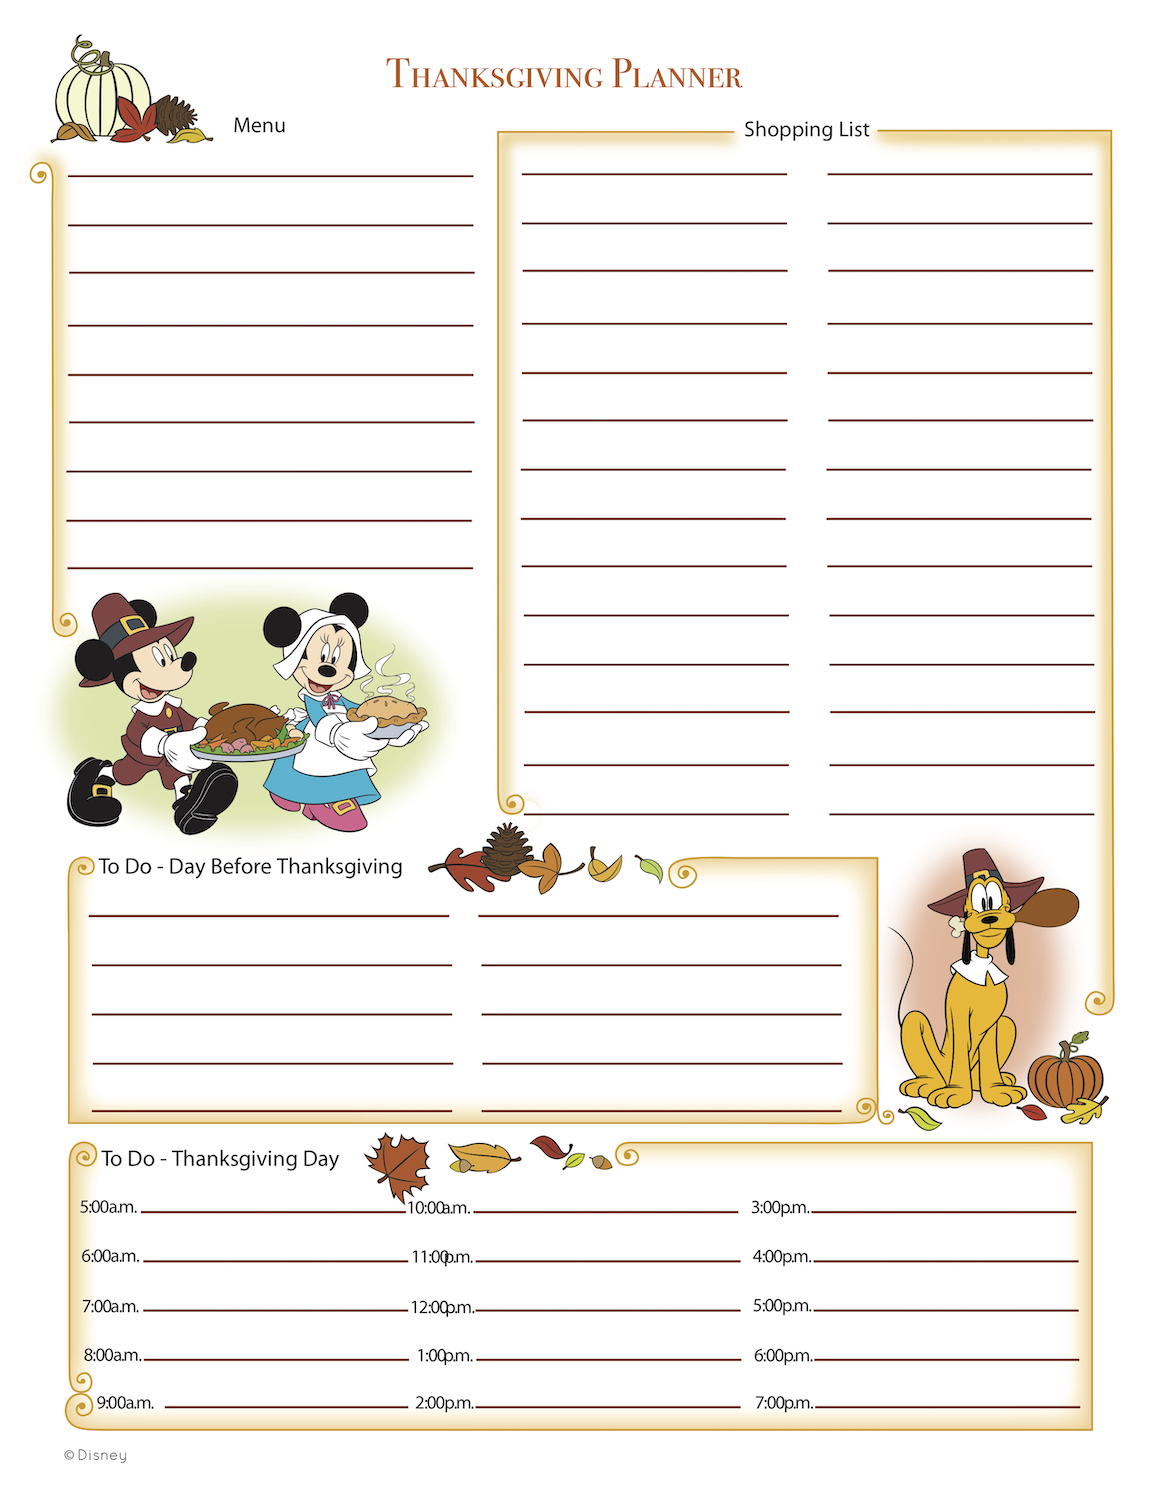 Mickey Thanksgiving Planner at KidsPartyWorks.Com